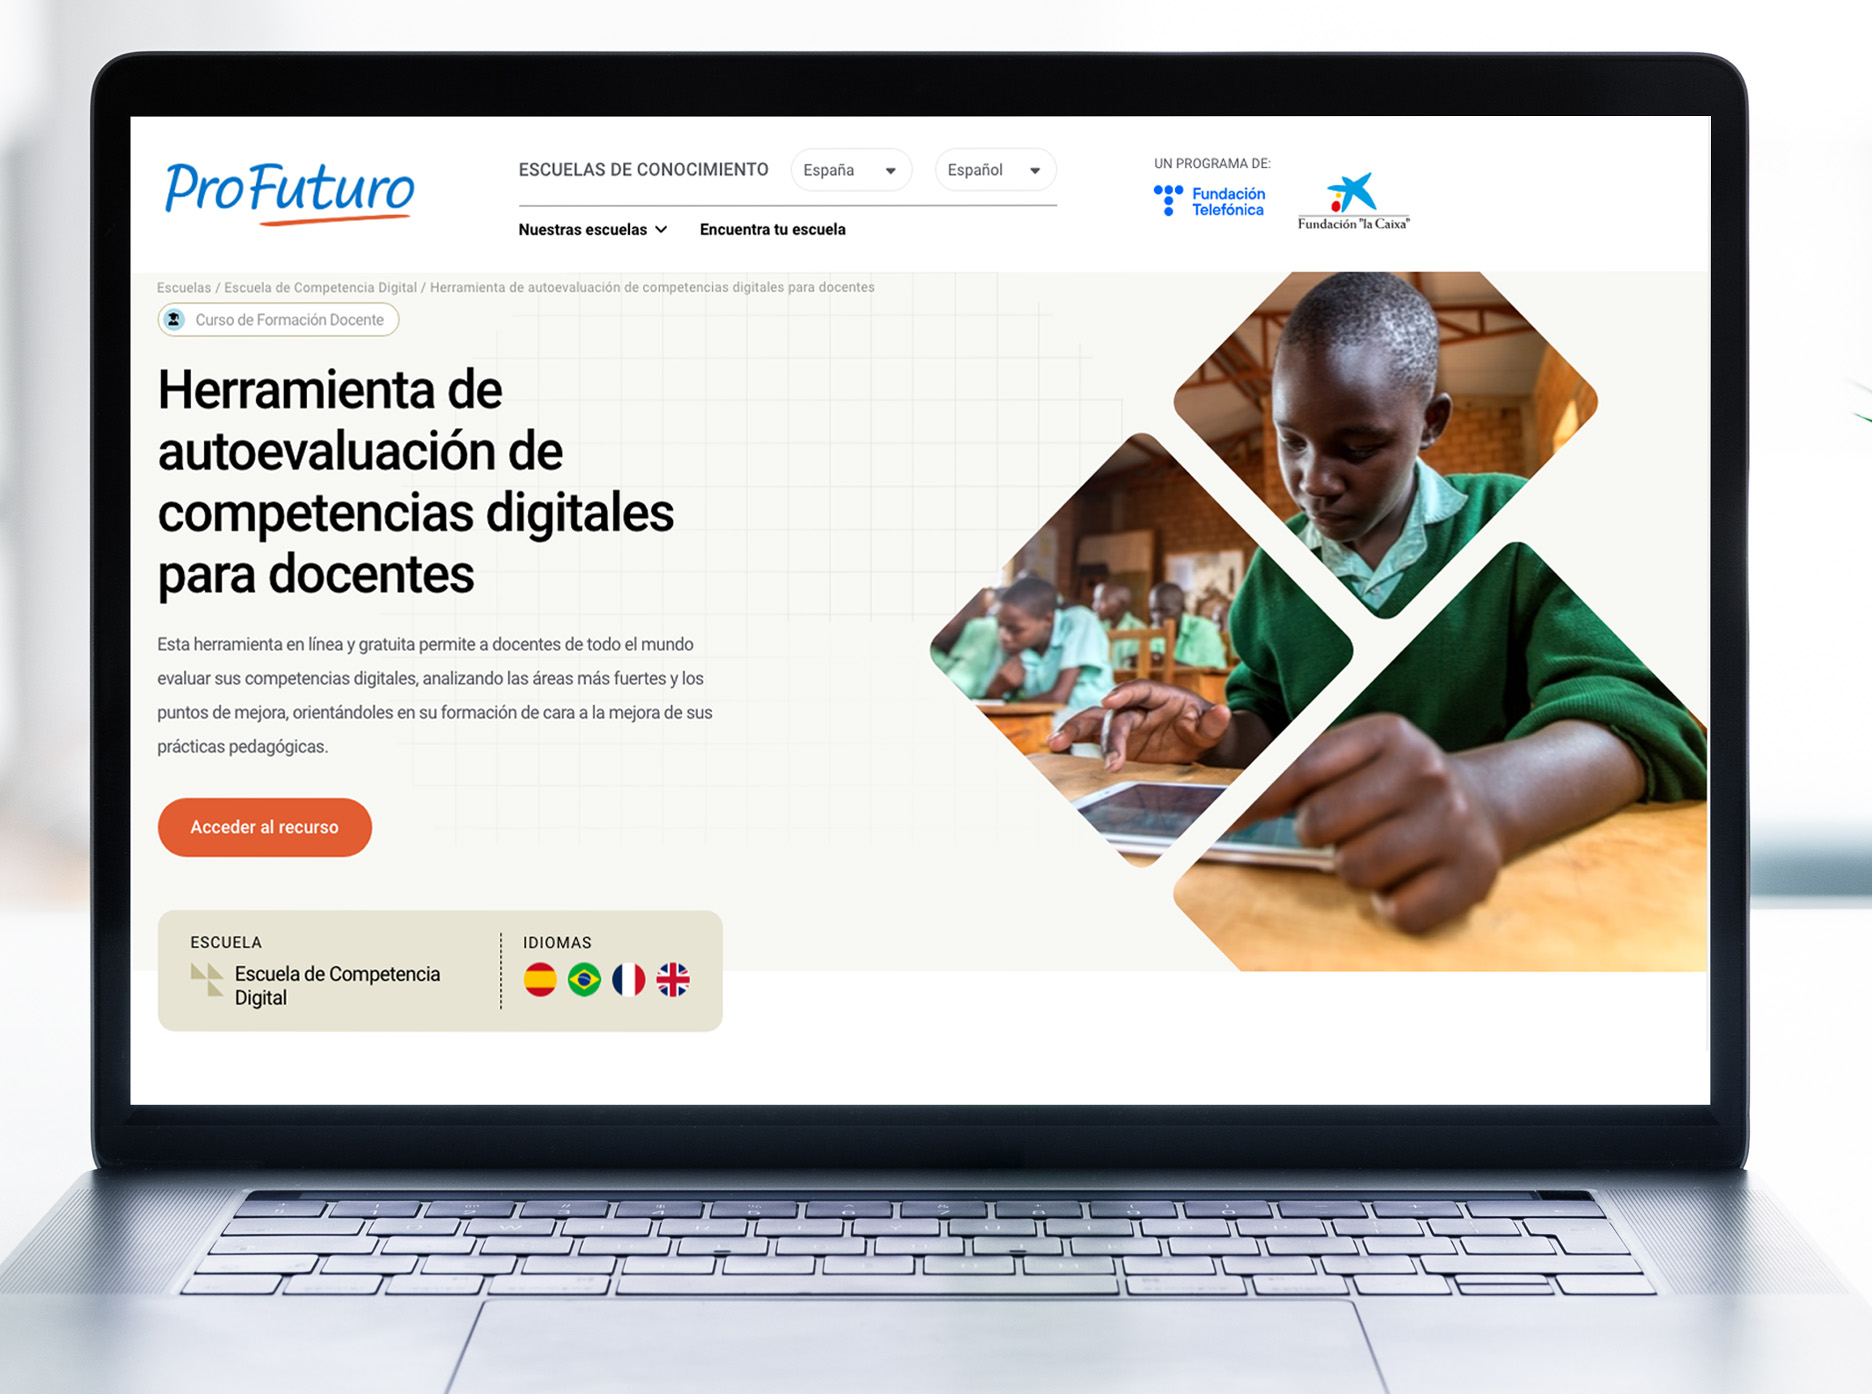 ProFuturo’s “Digital Skills Self-Assessment for Teachers” tool continues to be a reference in the education sector